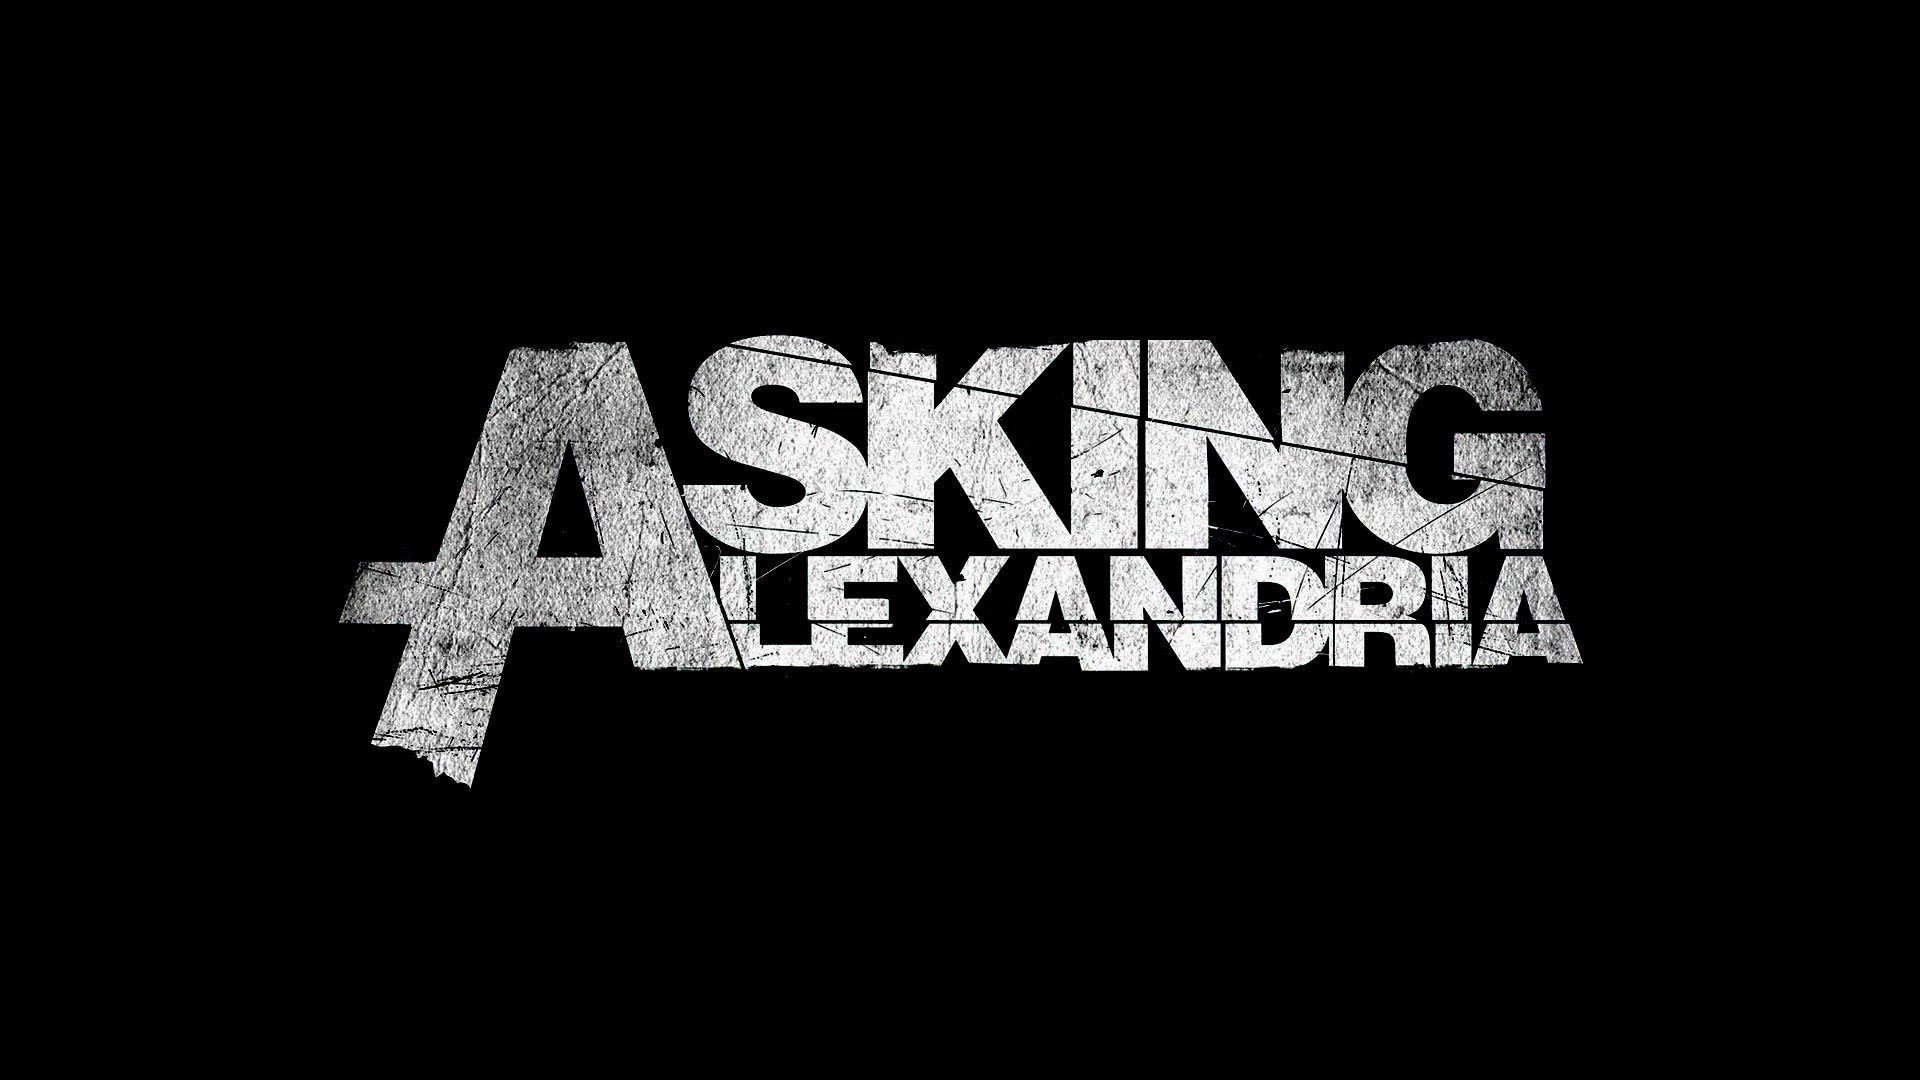 1920x1080  free asking alexandria background hd wallpapers background photos  windows amazing best wallpaper ever samsung wallpapers download pictures ...